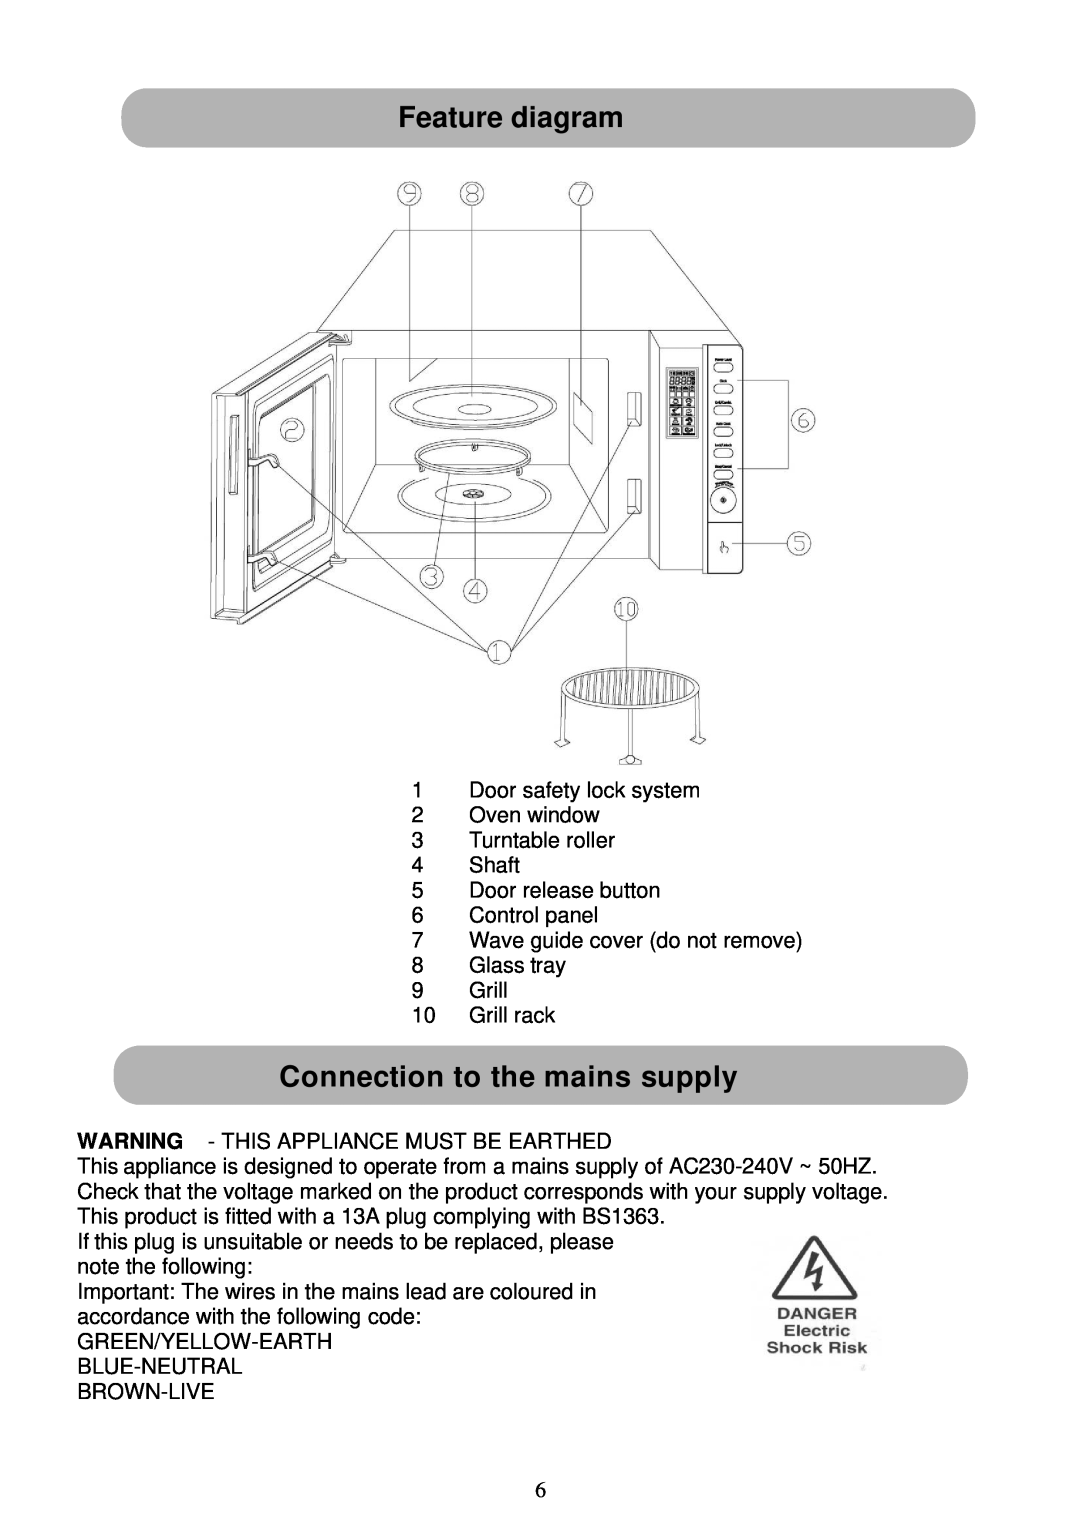 Russell Hobbs RHM2305 user manual Feature diagram, Connection to the mains supply 